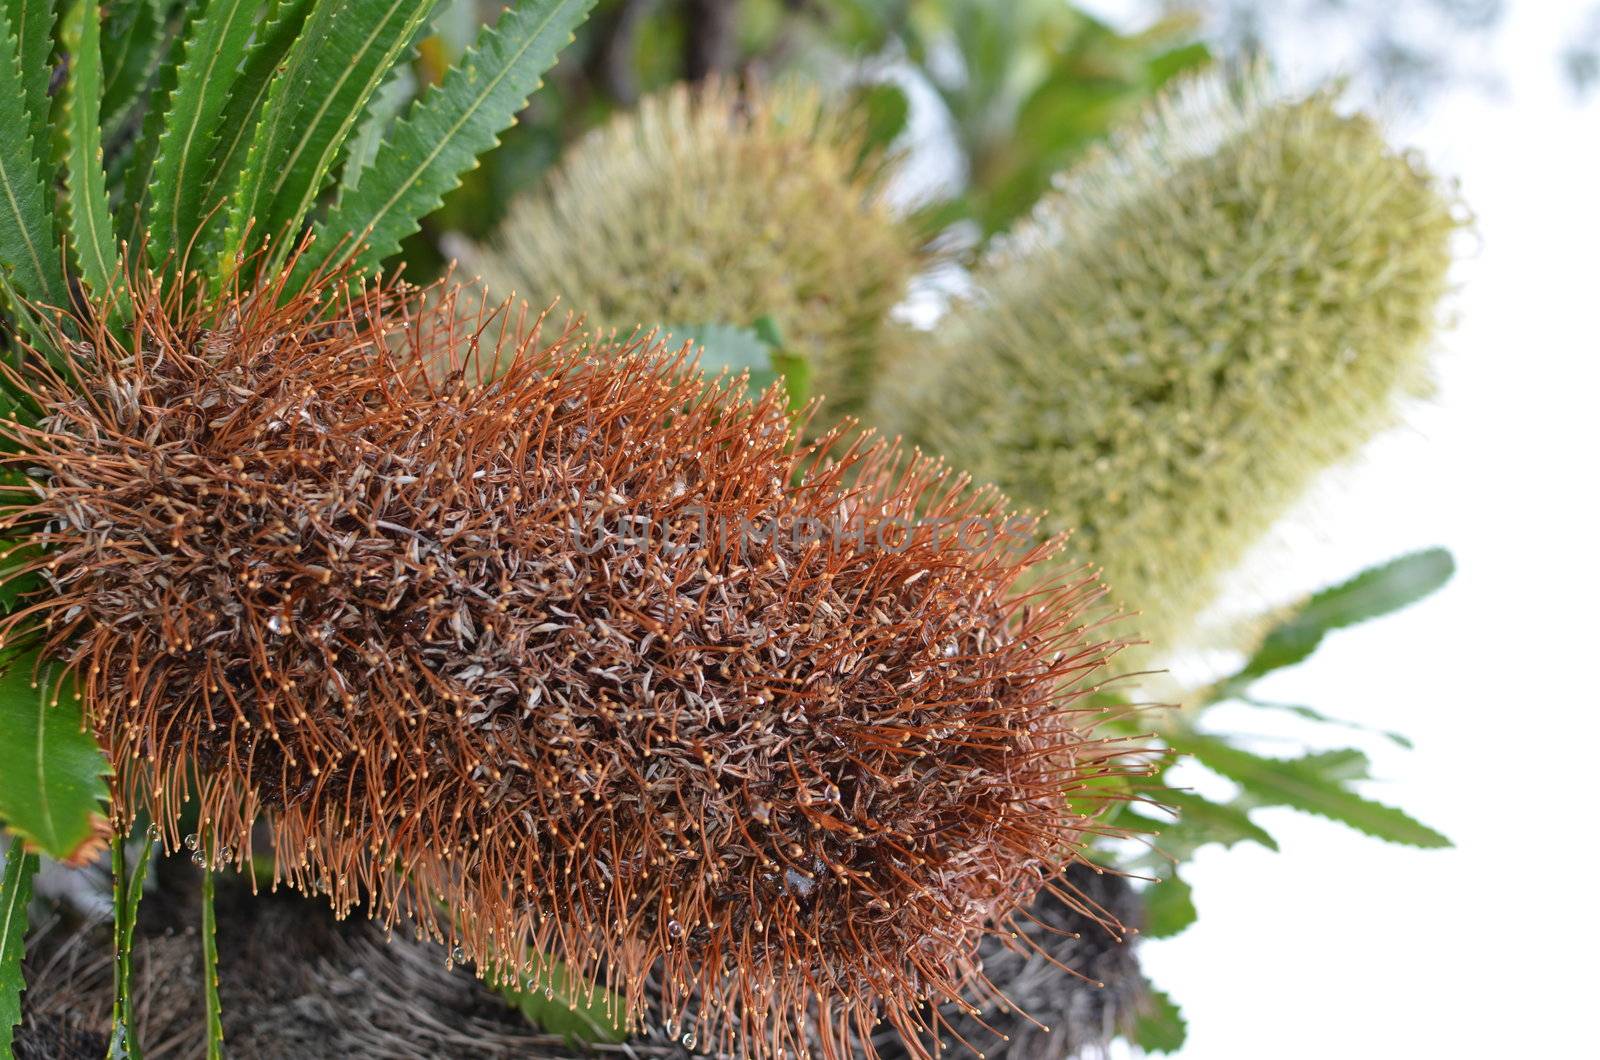 Old and new flower heads on a Banksia Integrifolia tree. The Banksia Integrifolia is endemic to the east coast of Australia. This photo was taken on Queensland's Sunshine Coast.